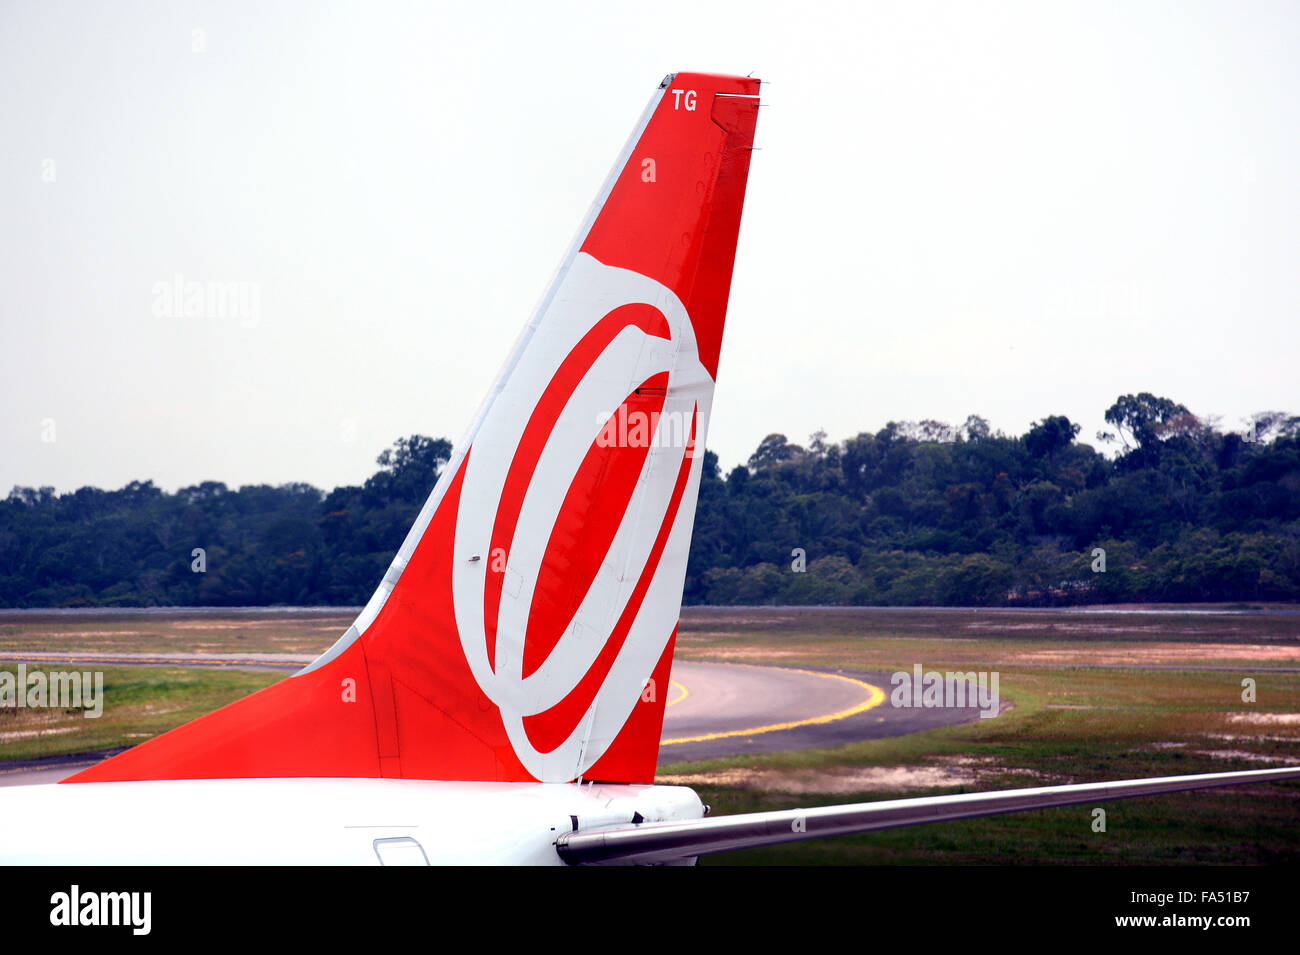 tail plane of Gol airlines company in Brasilia international airport Brazil Stock Photo